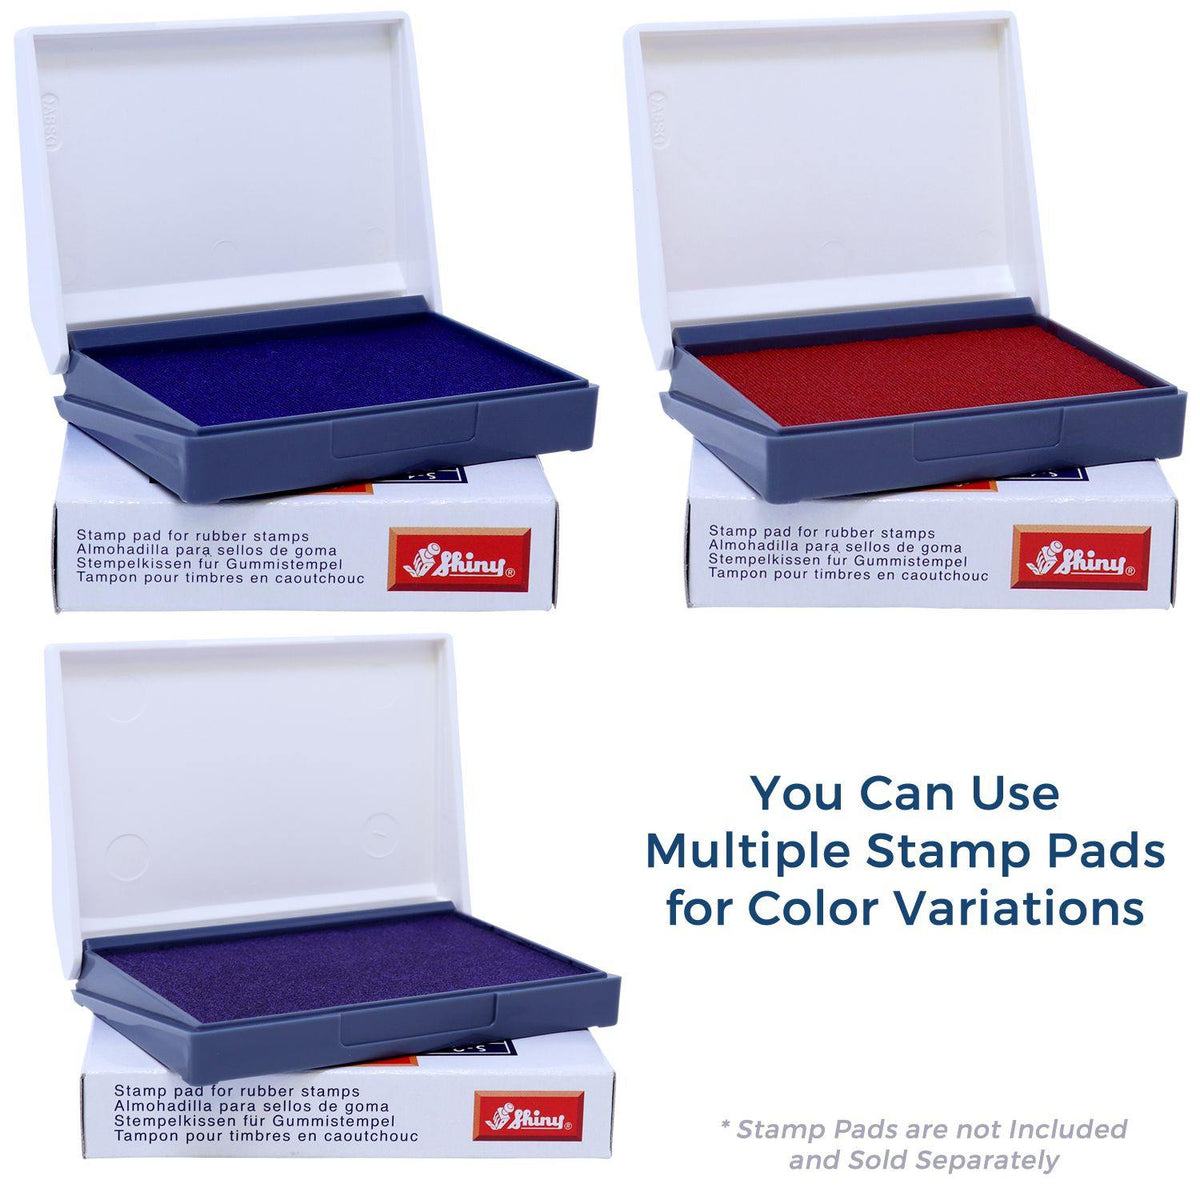 Stamp Pads for Covid-19 Test Pending Rubber Stamp Available